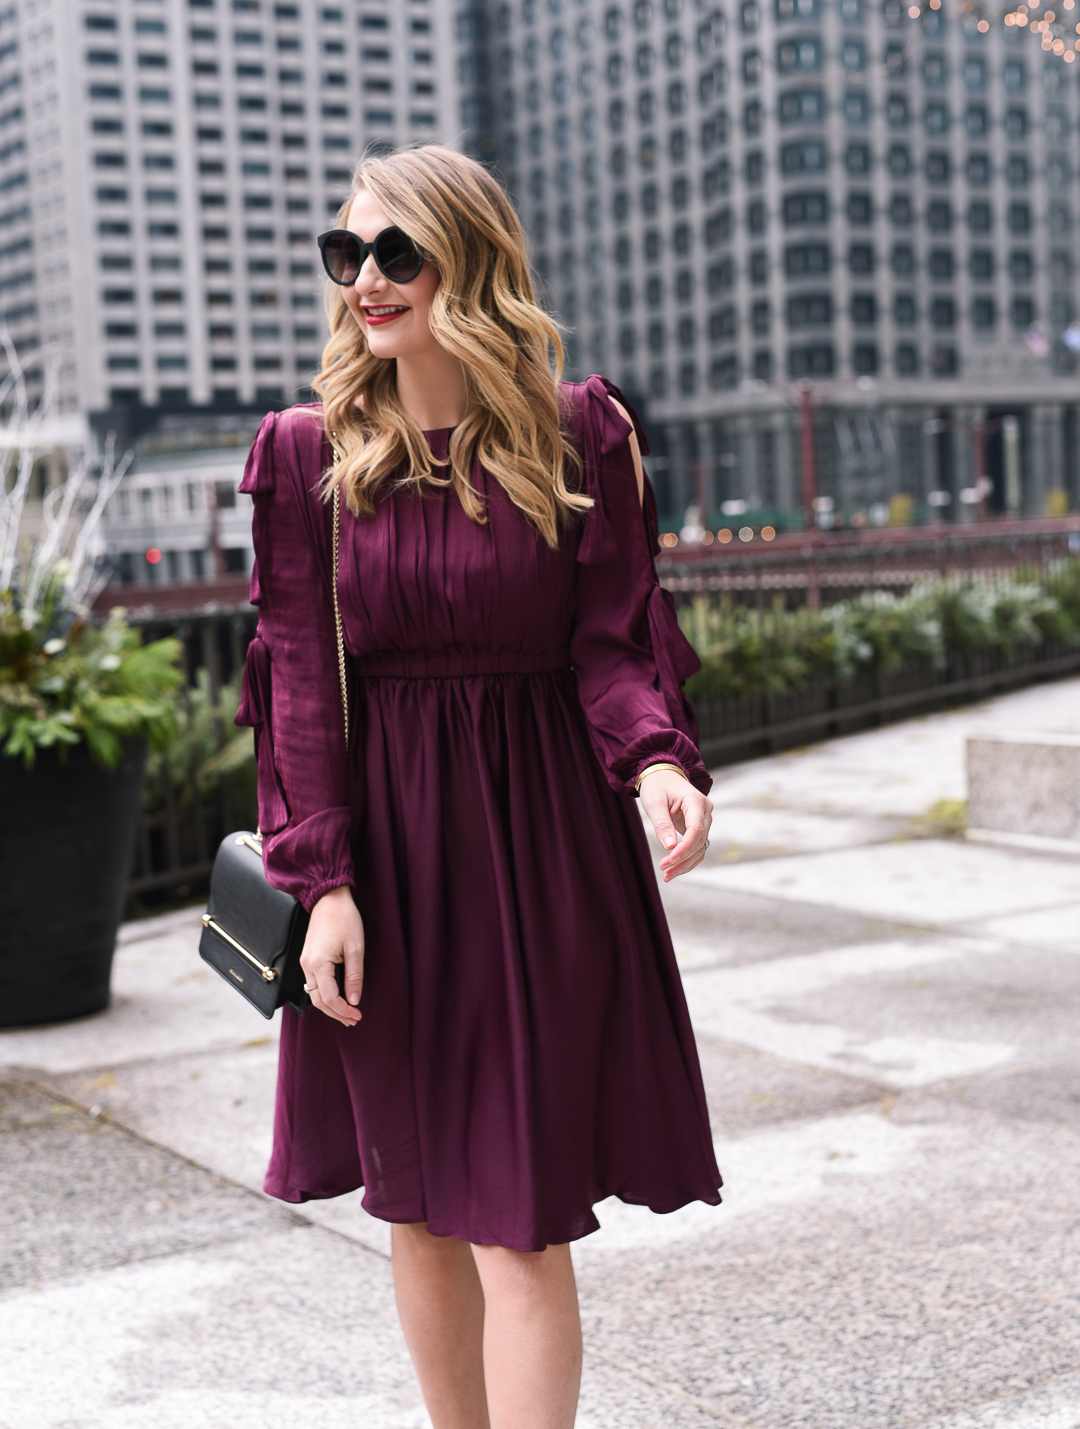 what to wear to an office holiday party - Burgundy Holiday Dress by Chicago fashion blogger Visions of Vogue